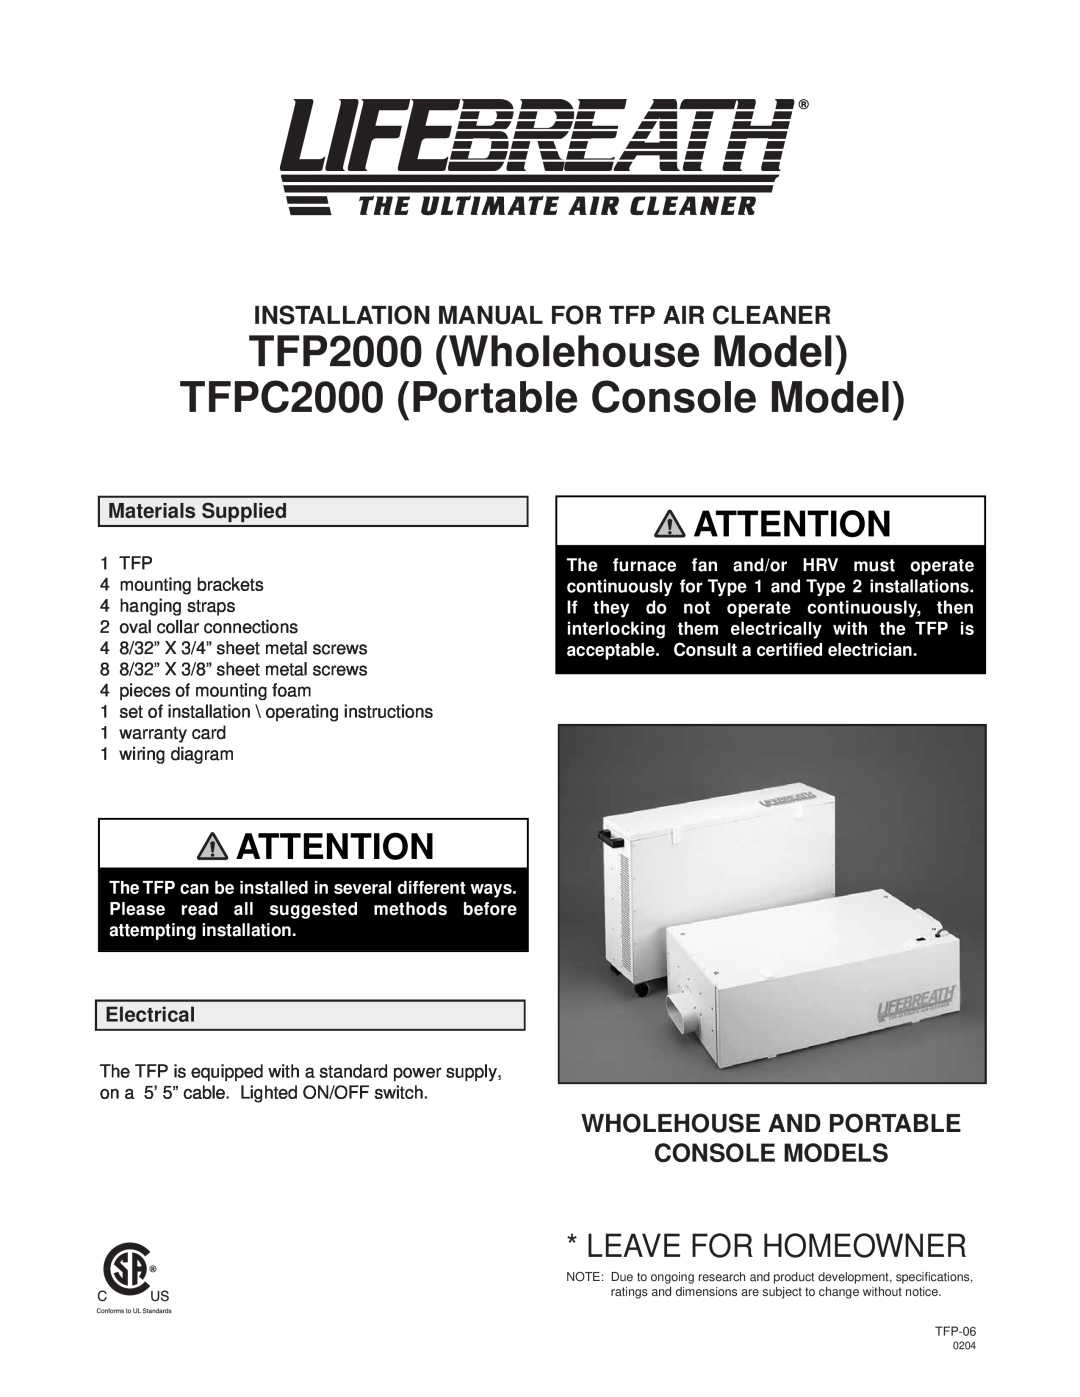 Lifebreath TFPC2000, TFP2000 installation manual Materials Supplied, Electrical, Leave For Homeowner 